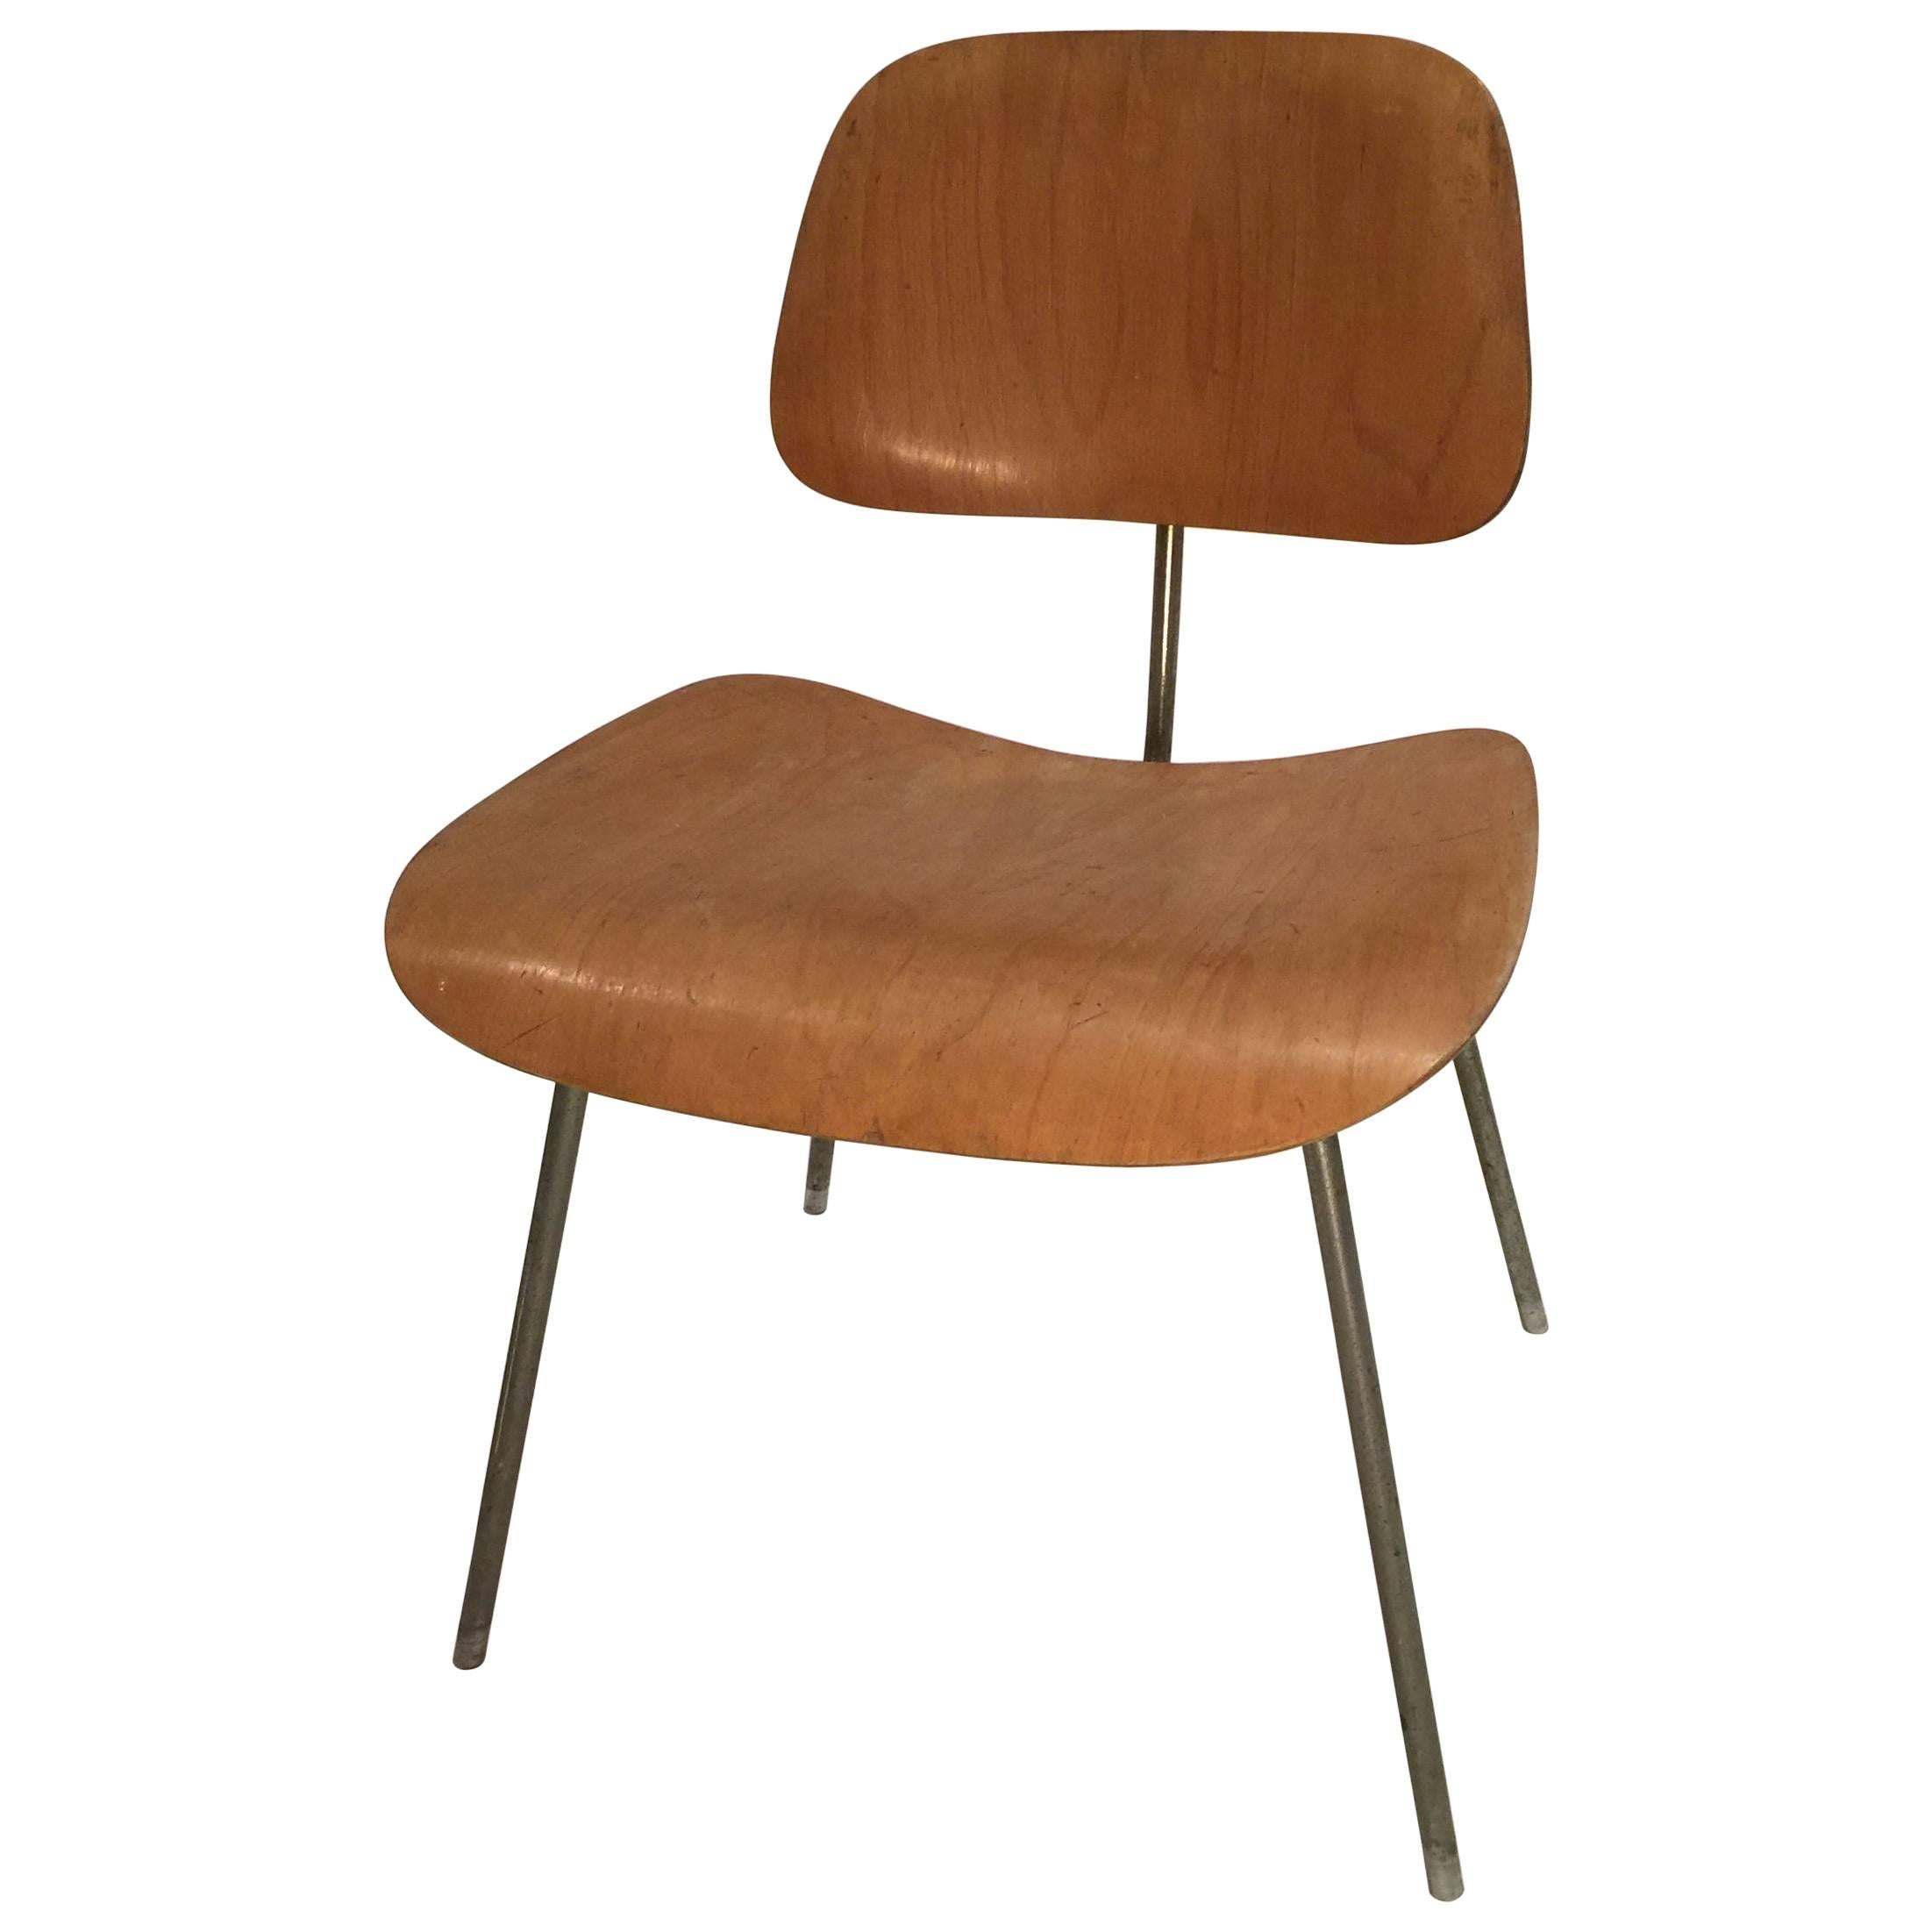 1950s Herman Miller Eames DCM Dining Chair